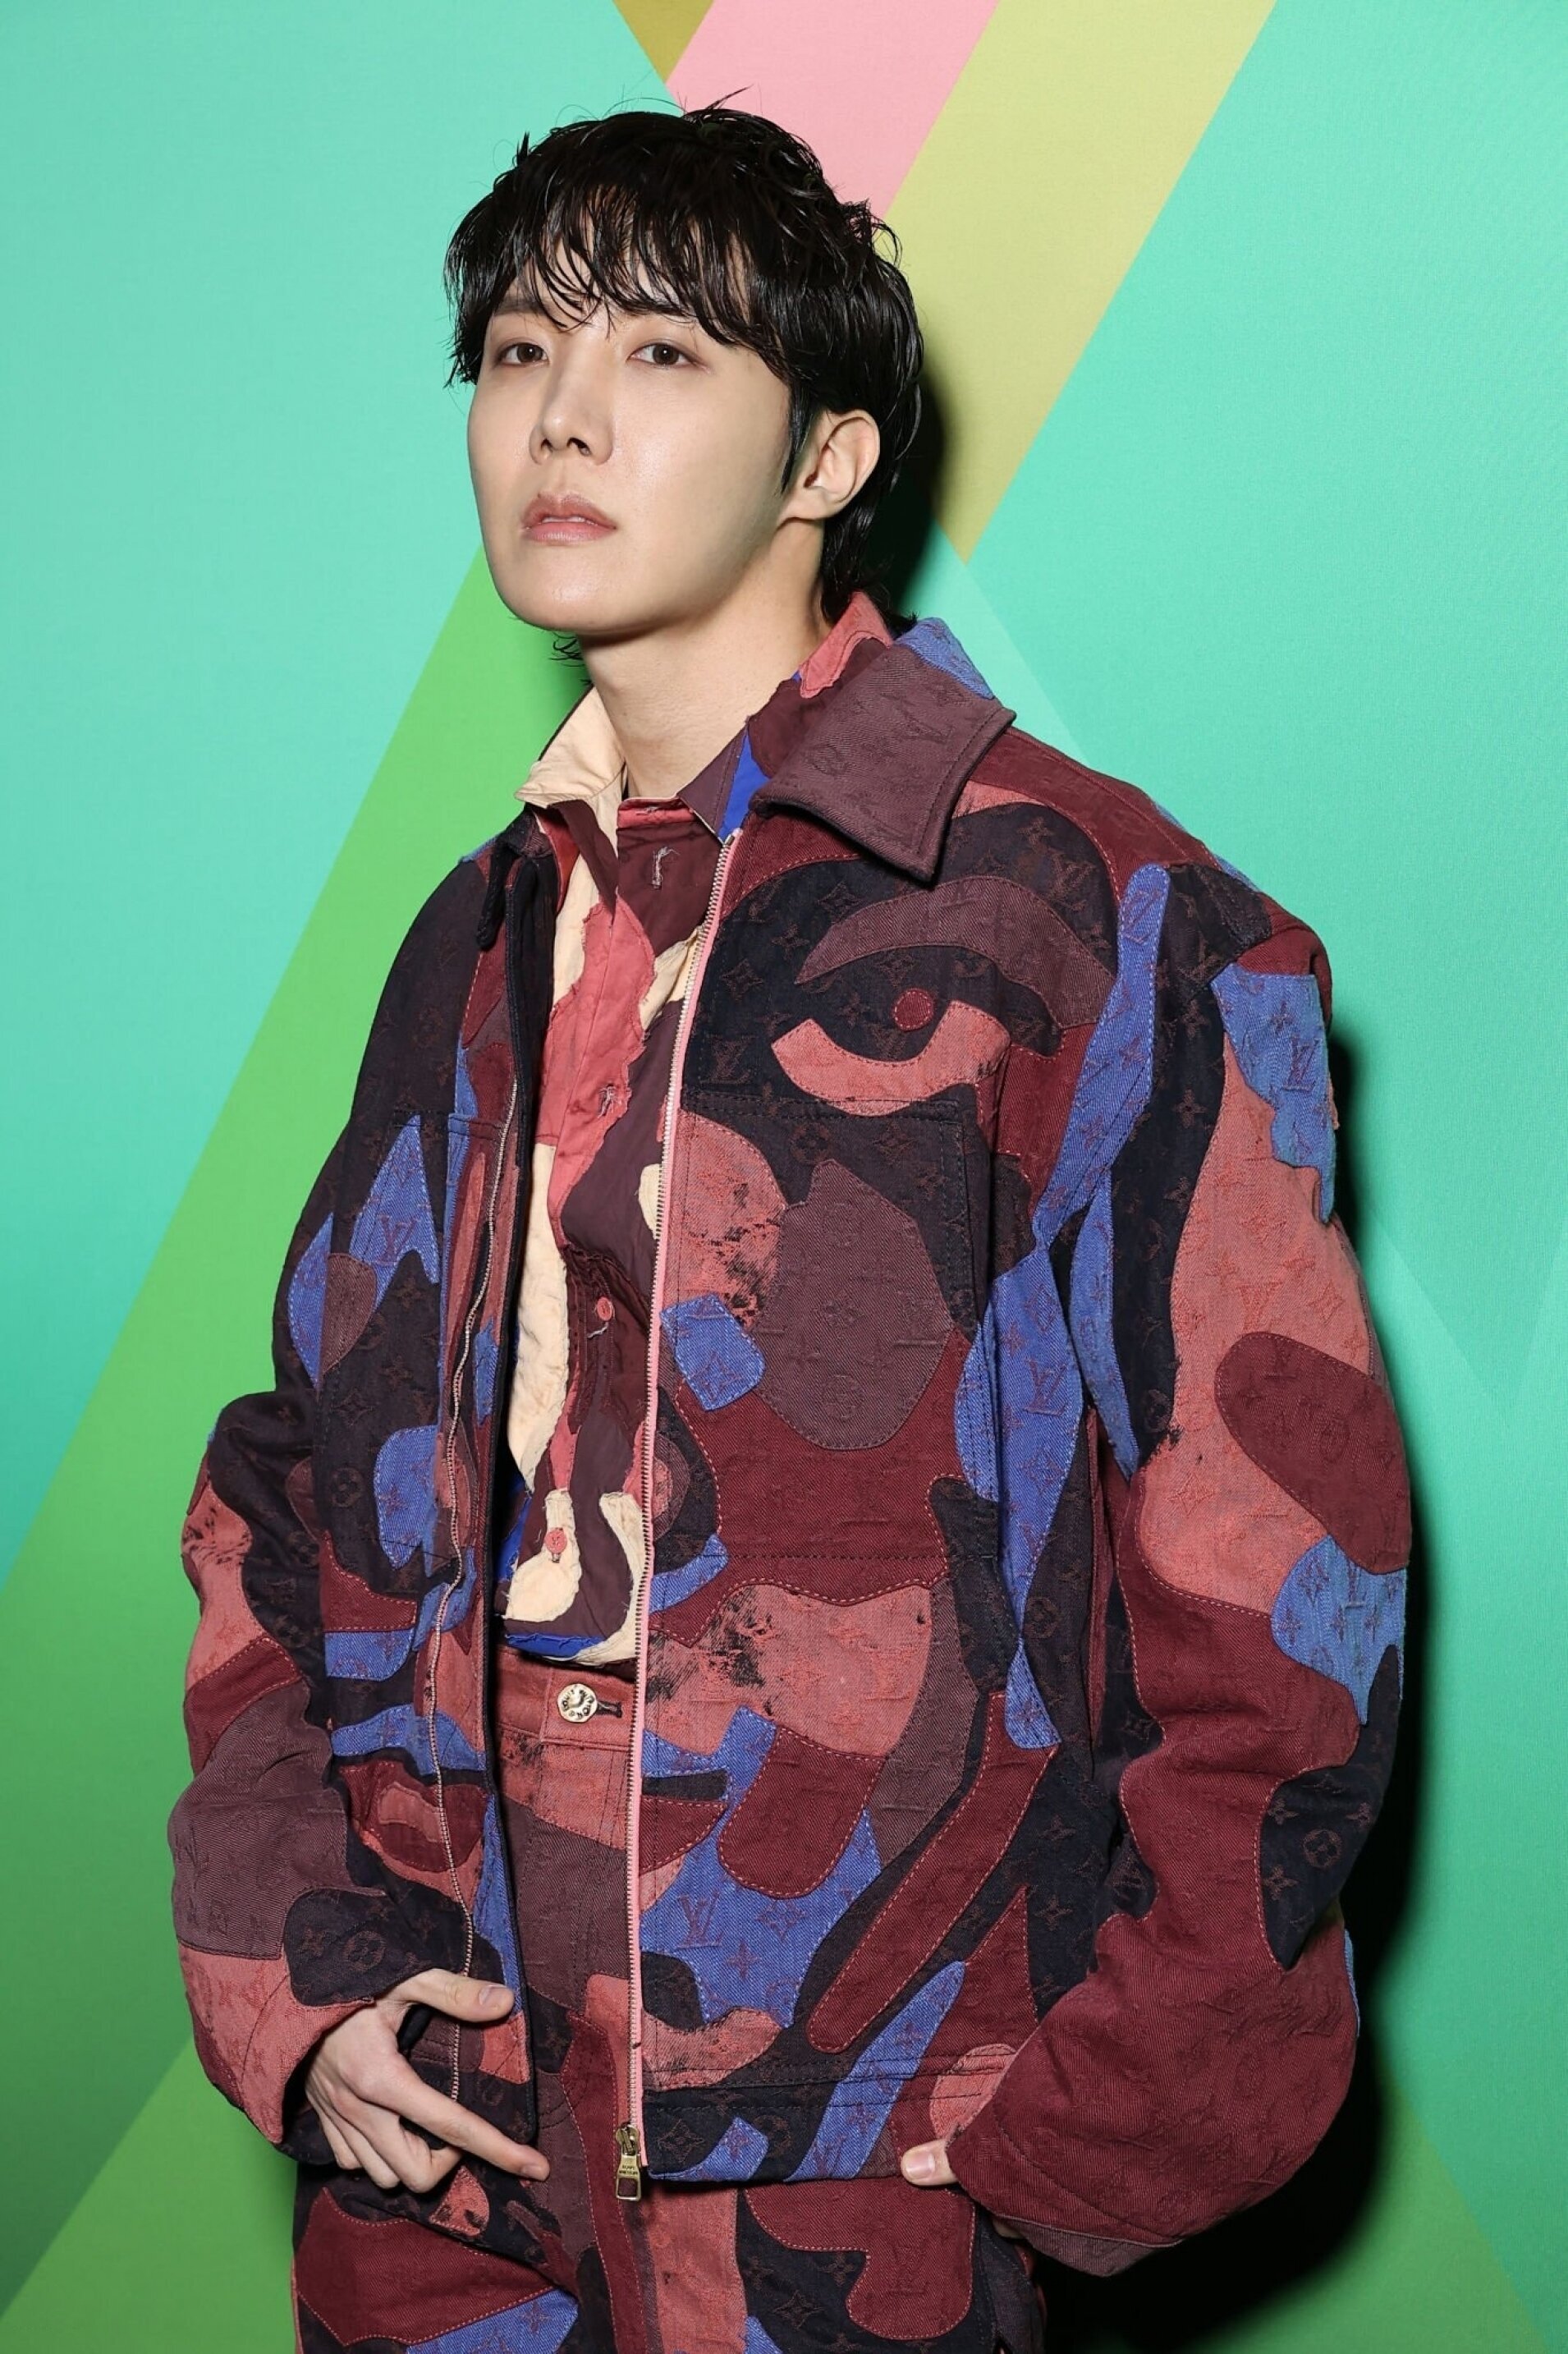 BTS J-hope wore a vibrant camouflage outfit that is fun and eye-catching at  the Louis Vuitton Men's Show at Paris Fashion Week - Bollywood Hungama